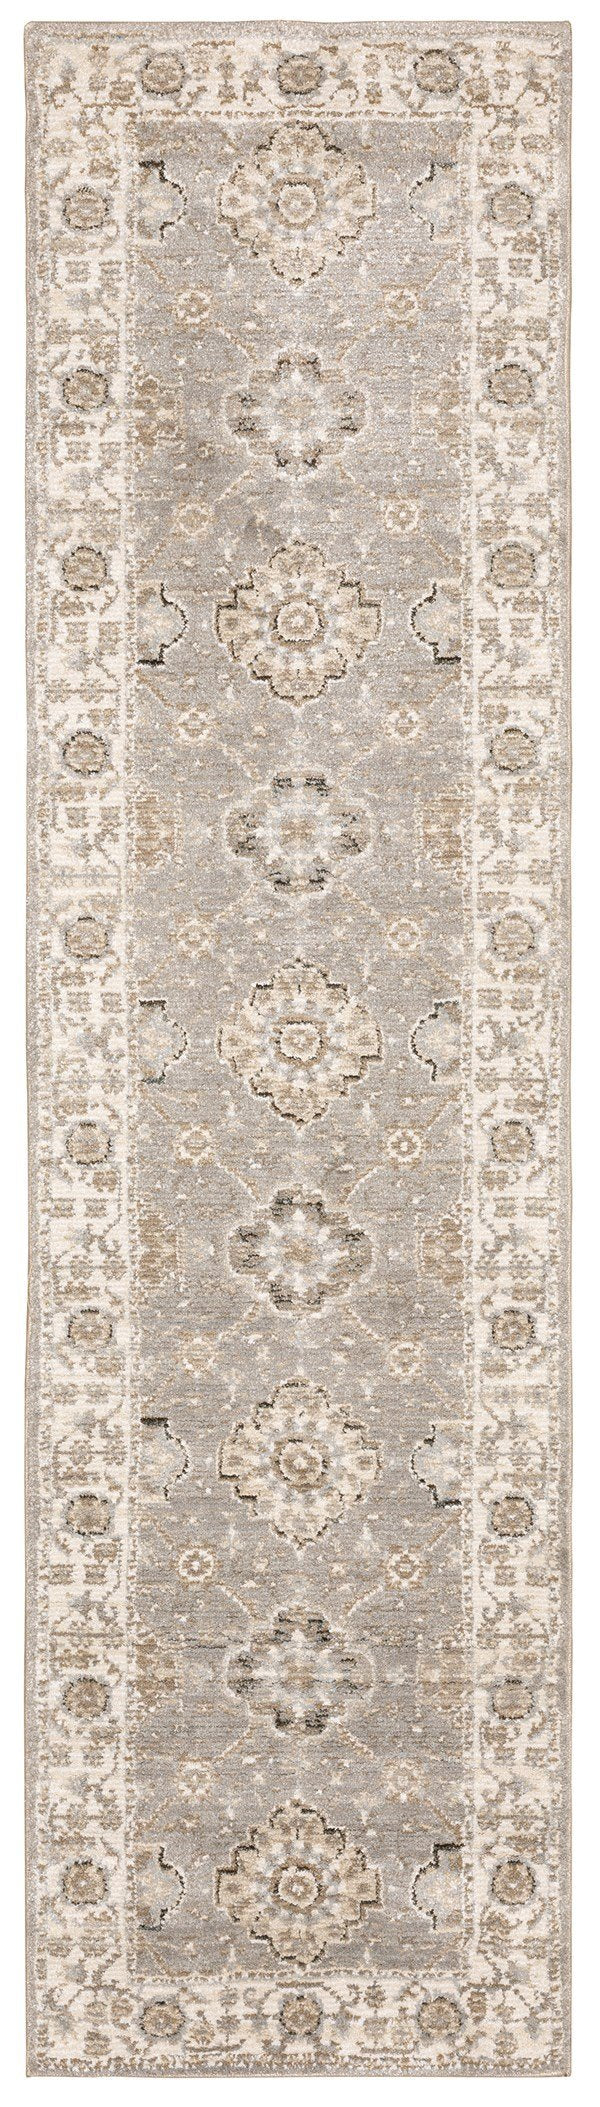 andorra collection oriental weavers area rugs carpet online rug store orange county california fountain valley refined carpet rugs online rug store affordable machine made traditional rugs